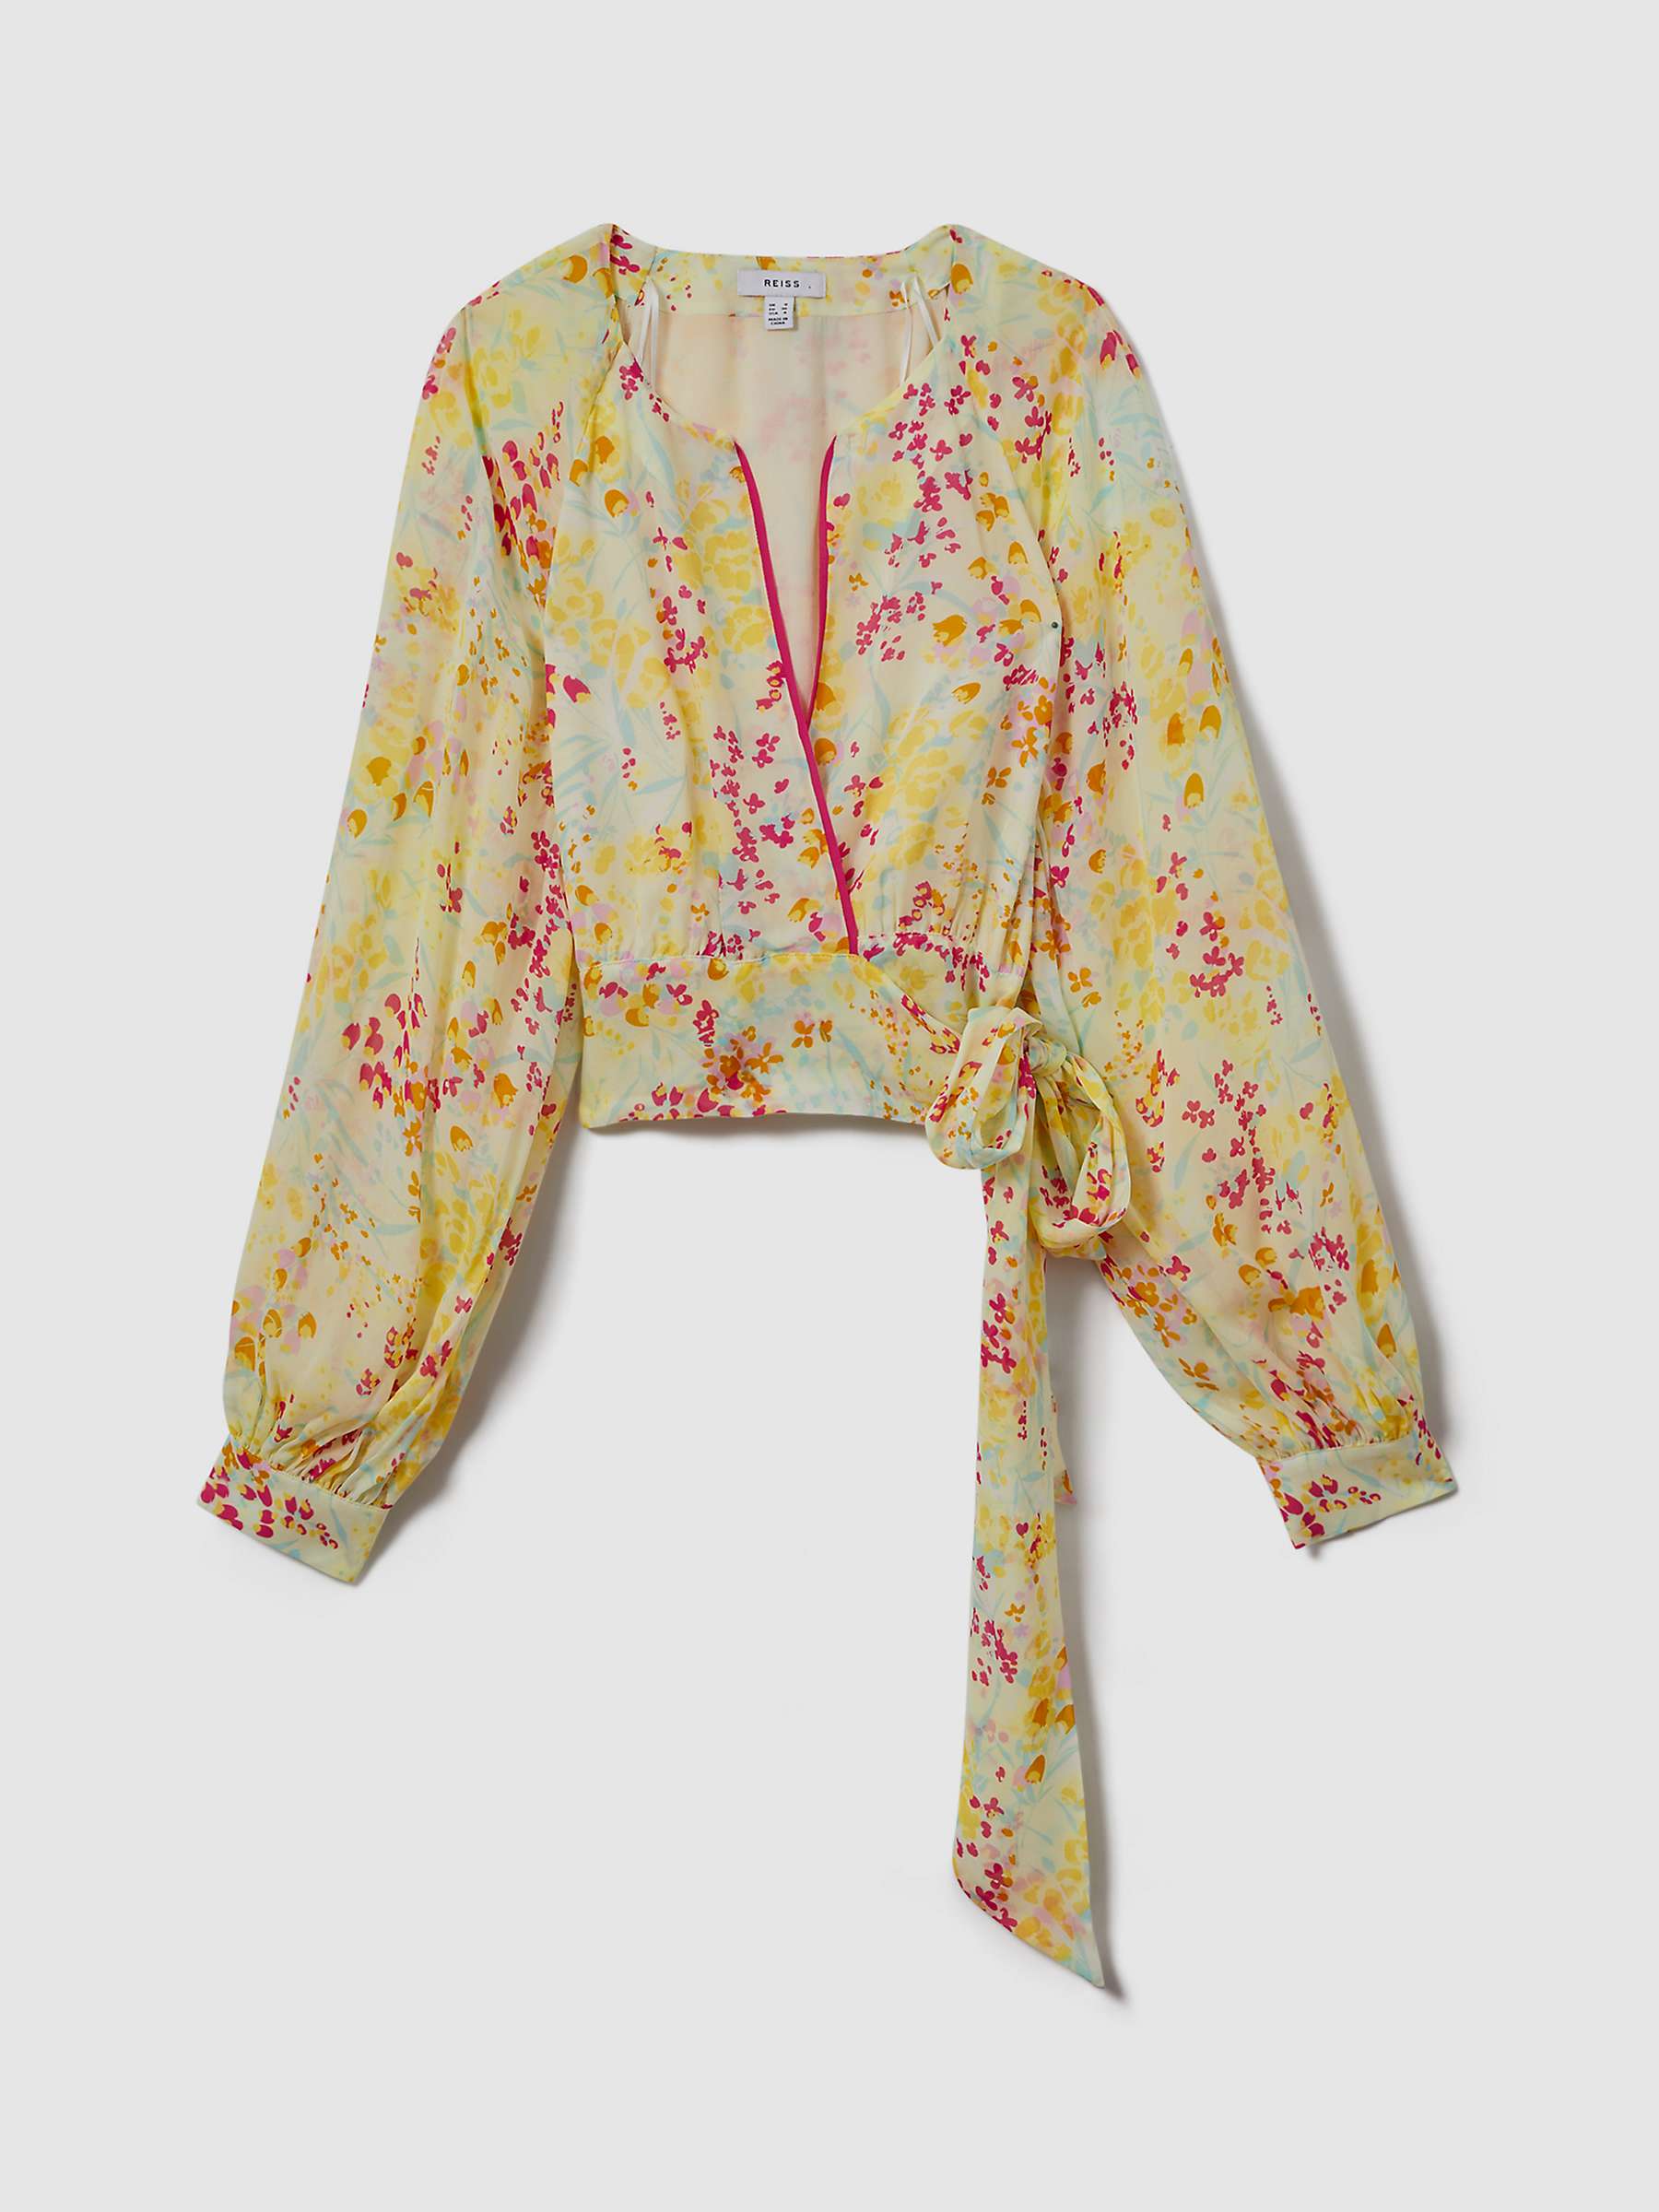 Buy Reiss Lyla Floral Print Tie Waist Cropped Blouse, Yellow/Multi Online at johnlewis.com